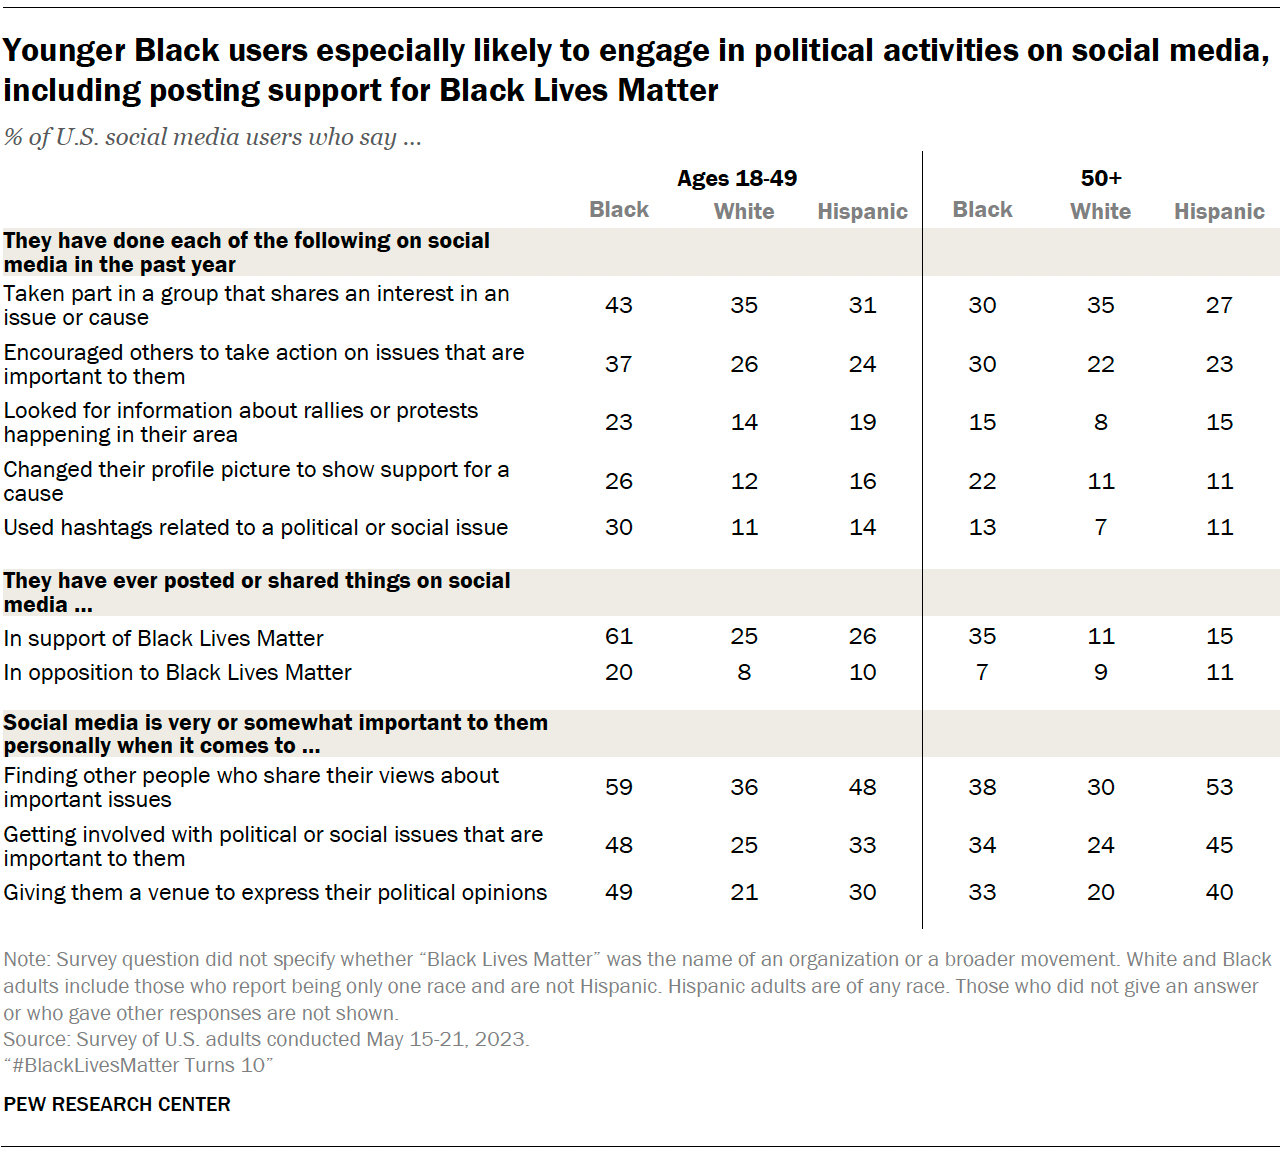 A table showing that Younger Black users especially likely to engage in political activities on social media, including posting support for Black Lives Matter